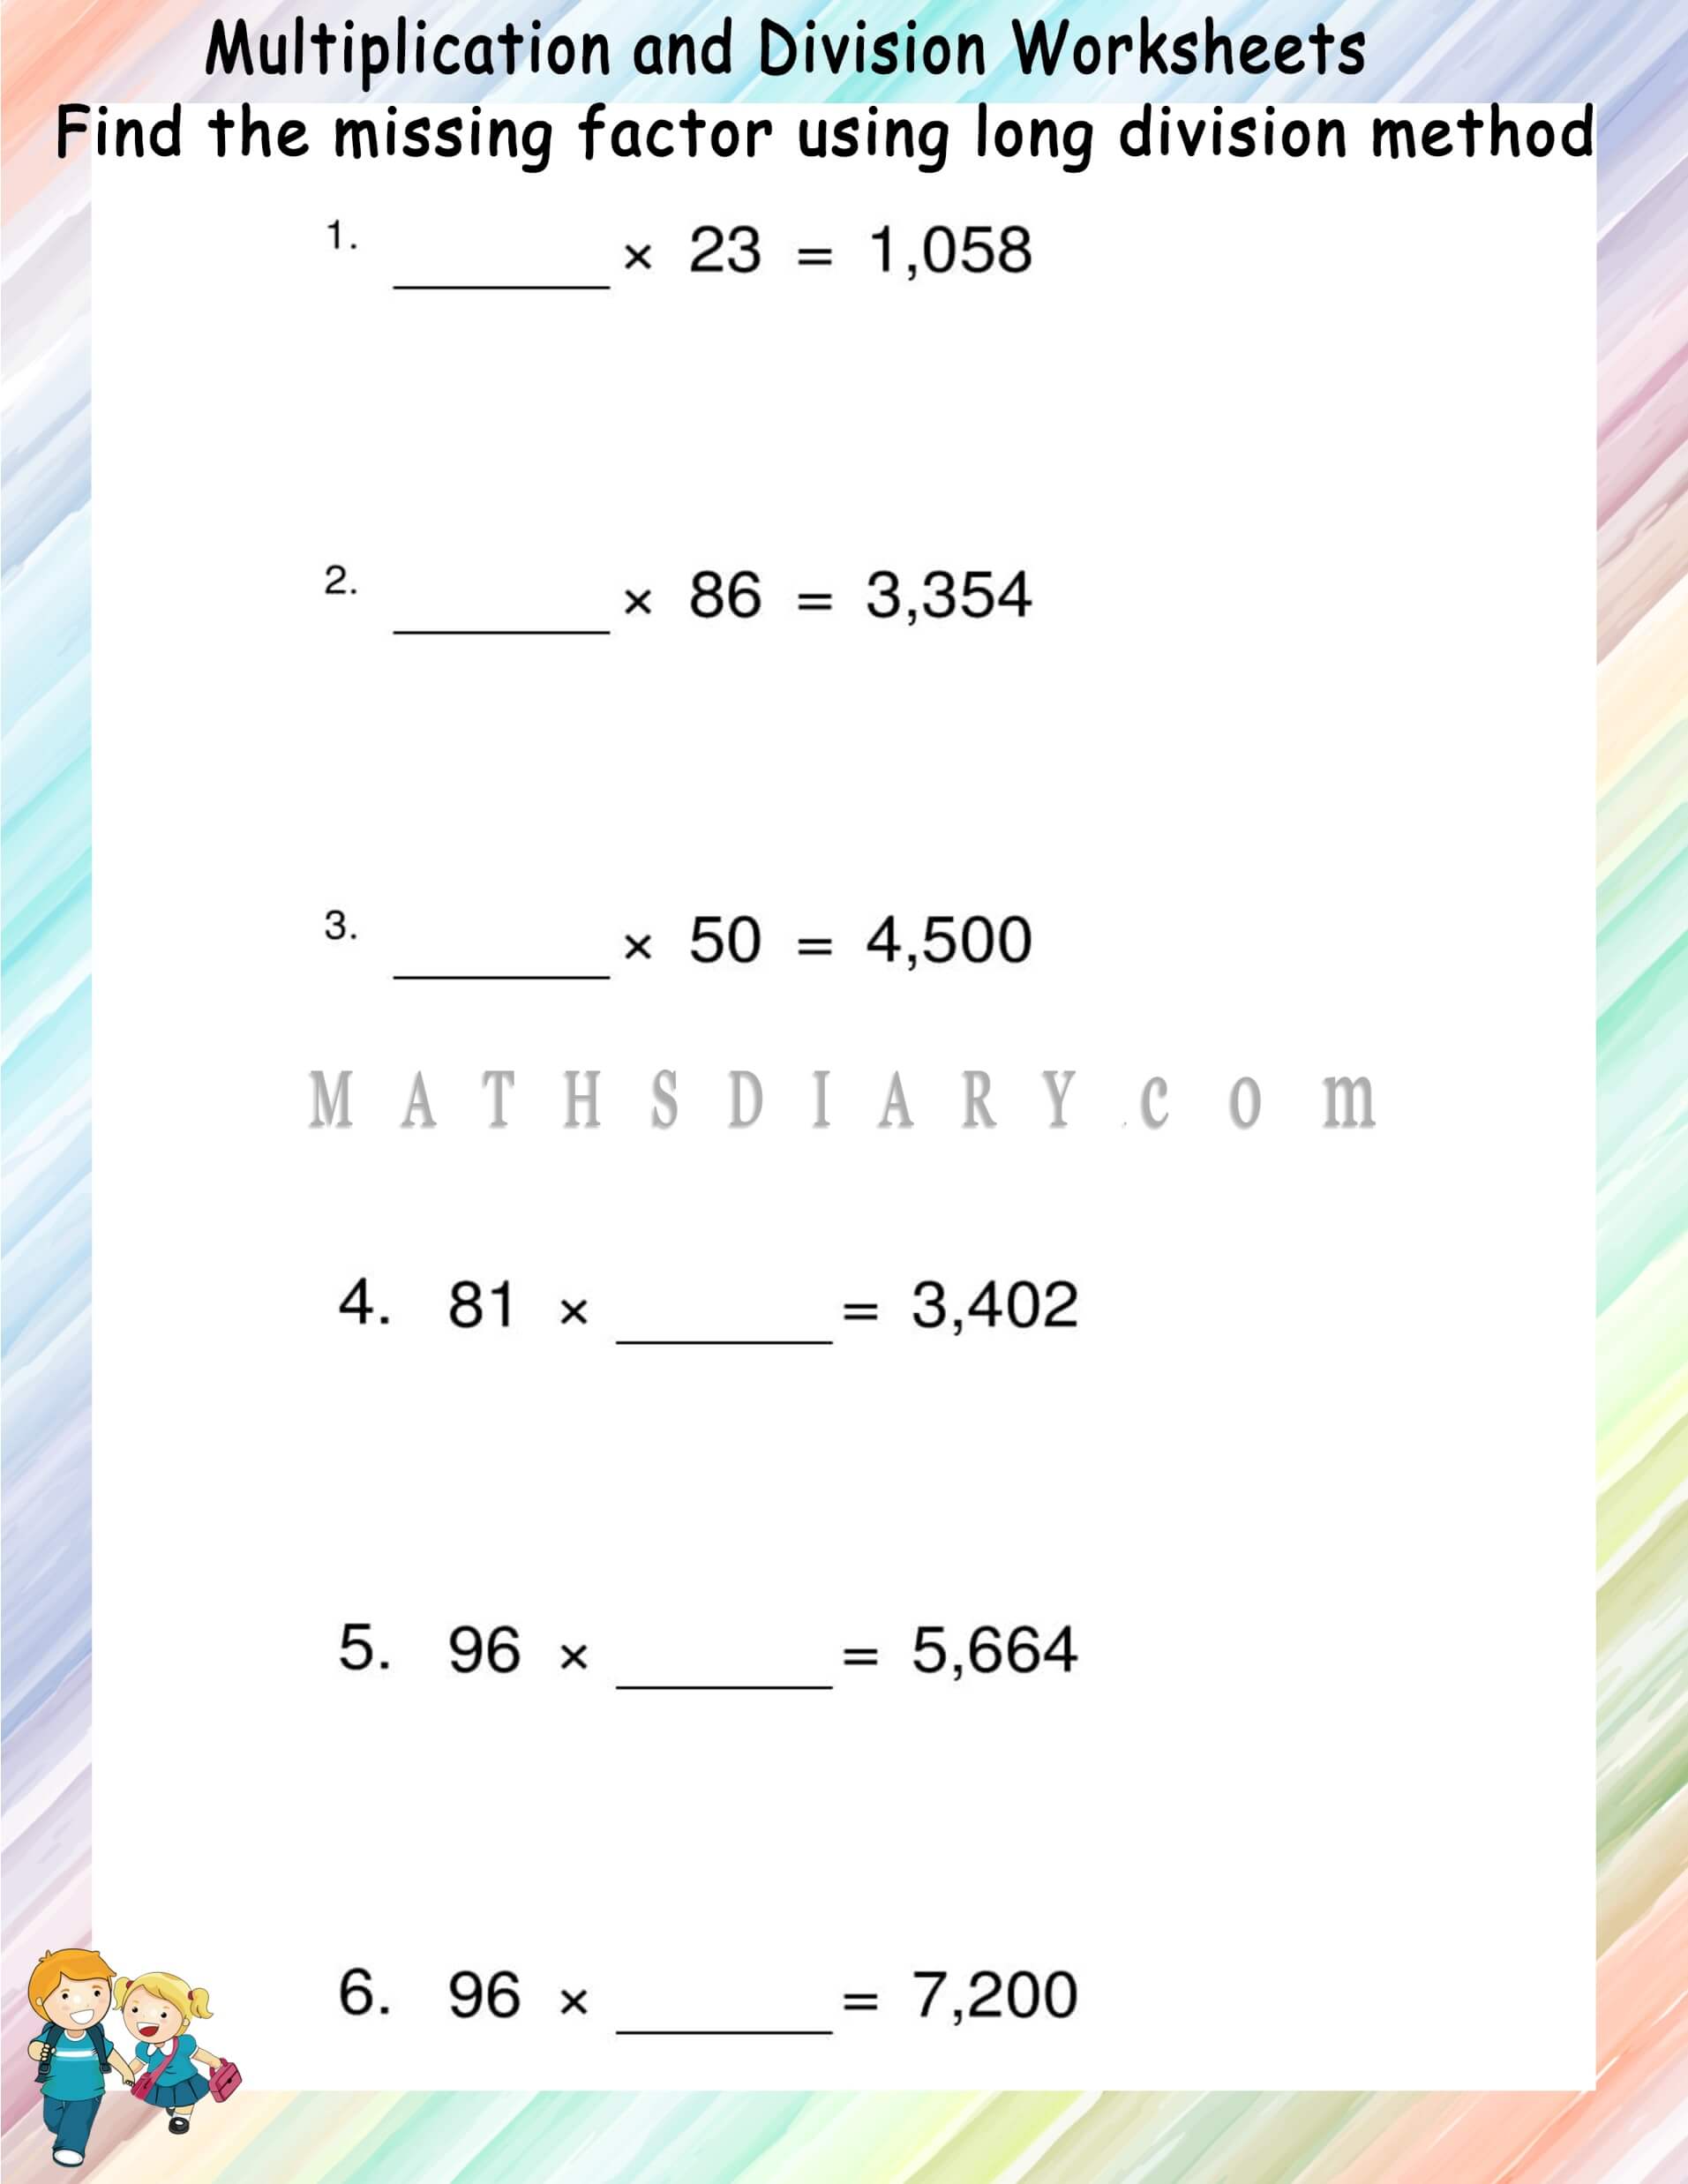 finding-missing-factor-in-multiplication-and-division-math-worksheets-mathsdiary